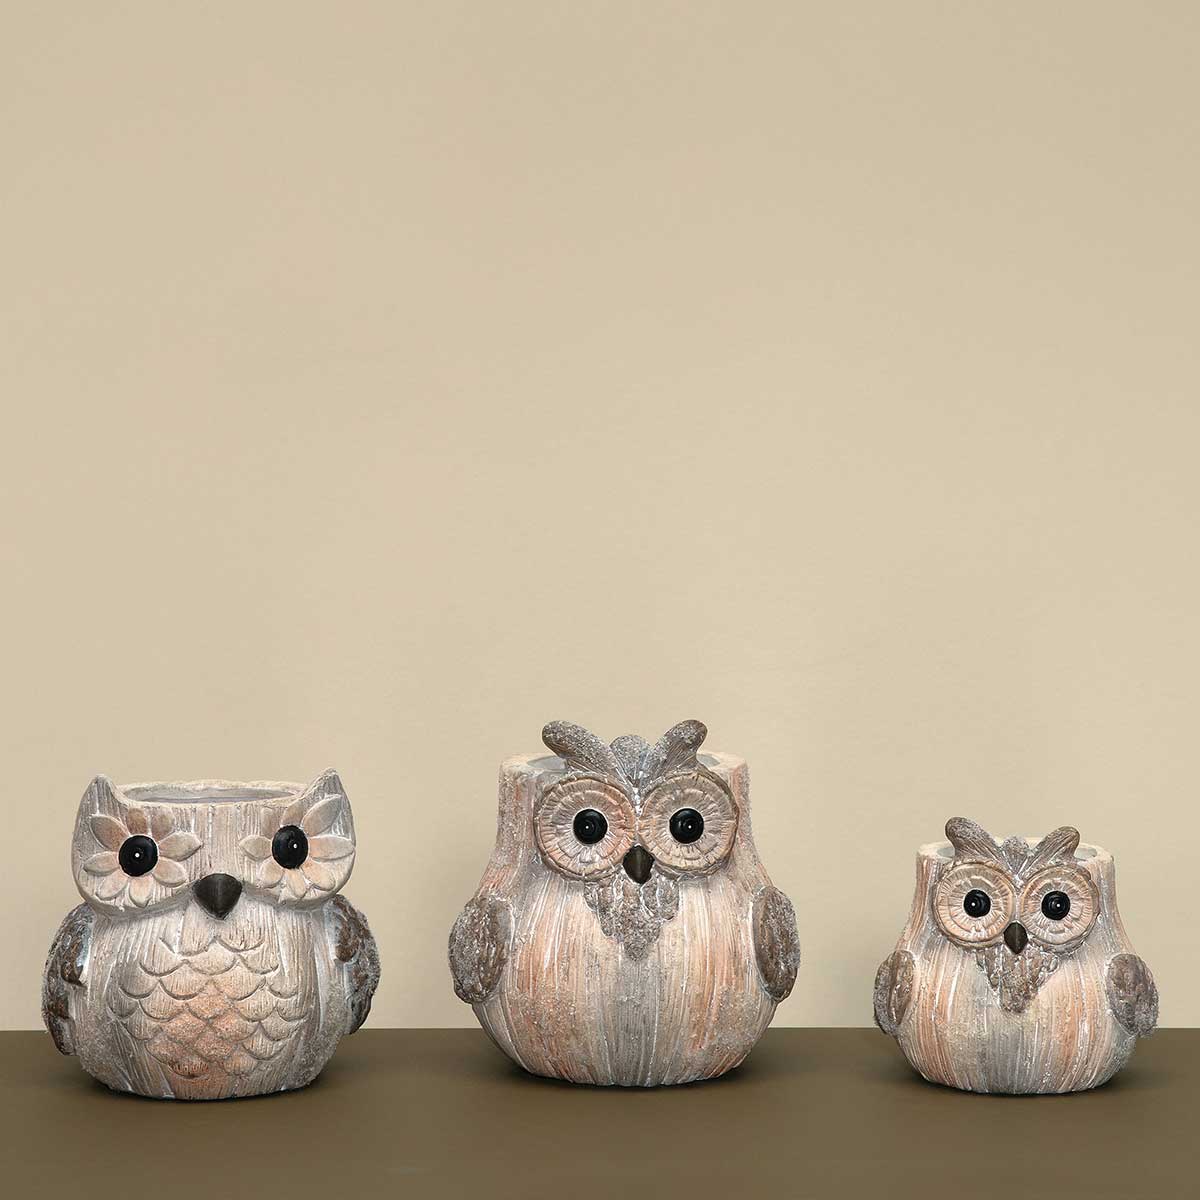 OLLIE FROSTED CERAMIC OWL POT CREAM/BROWN WITH MICA LG